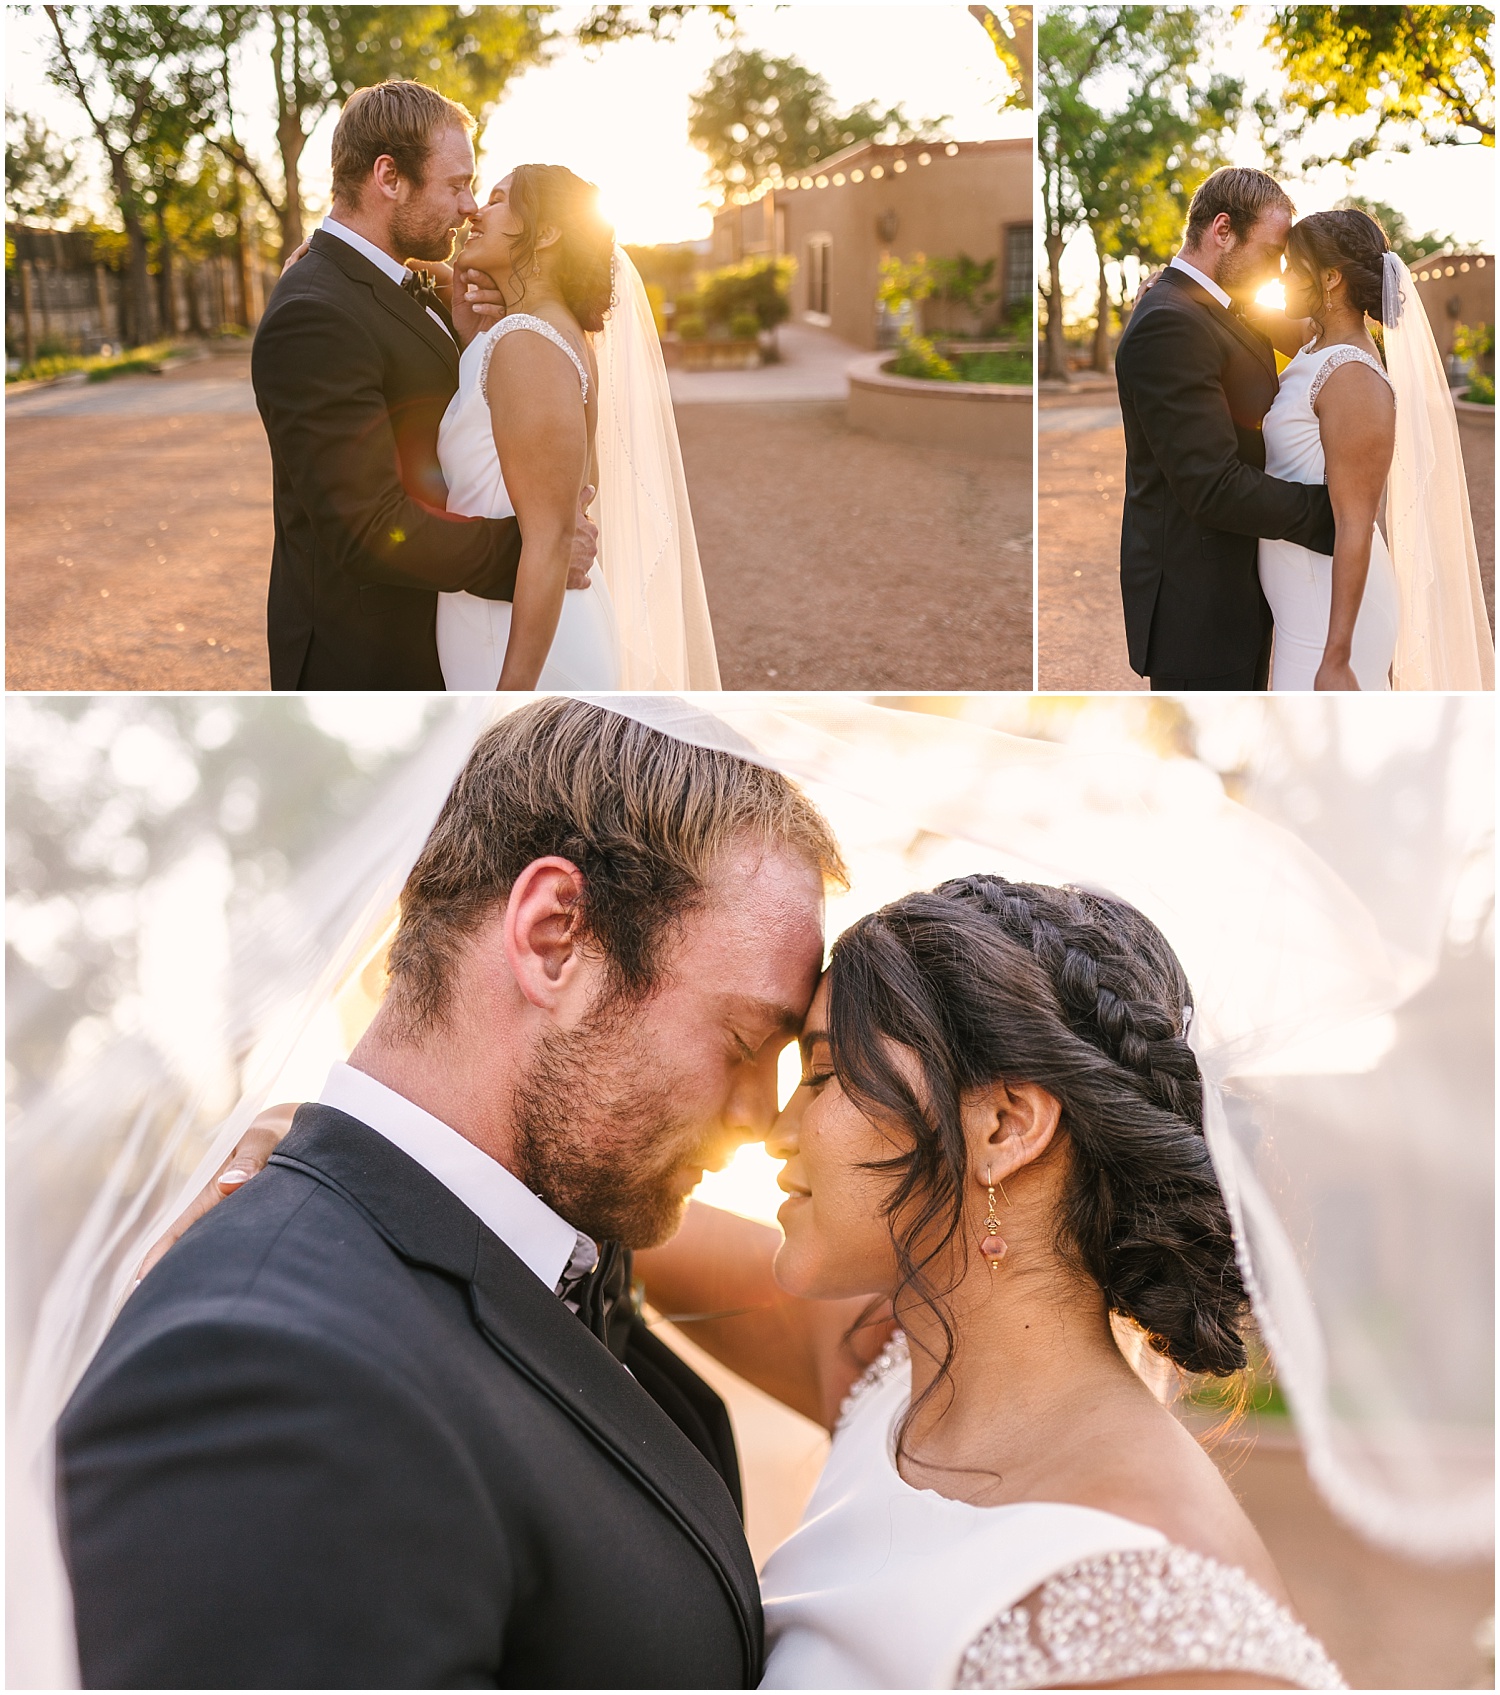 Bride and groom golden hour portraits under bride's veil at New Mexico wedding